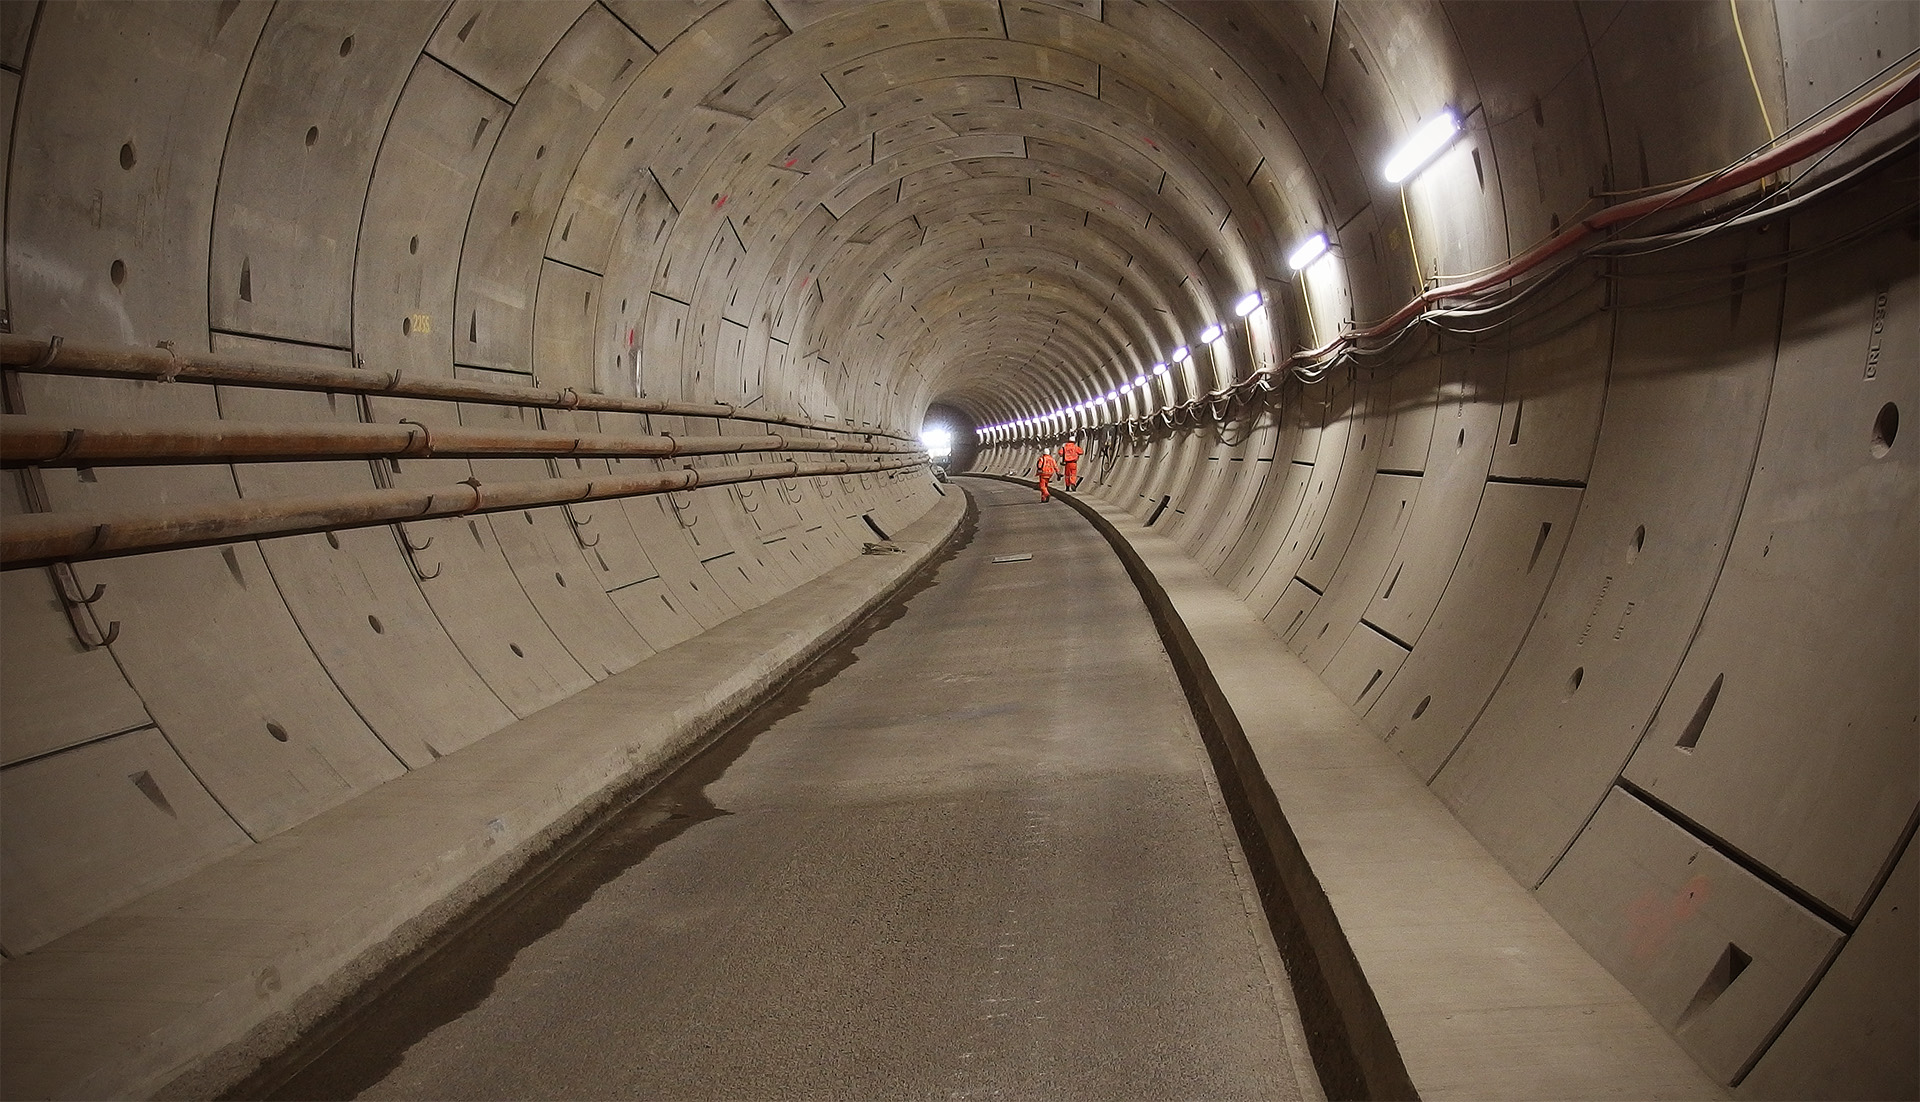 A very curved tunnel stretches off into the distance